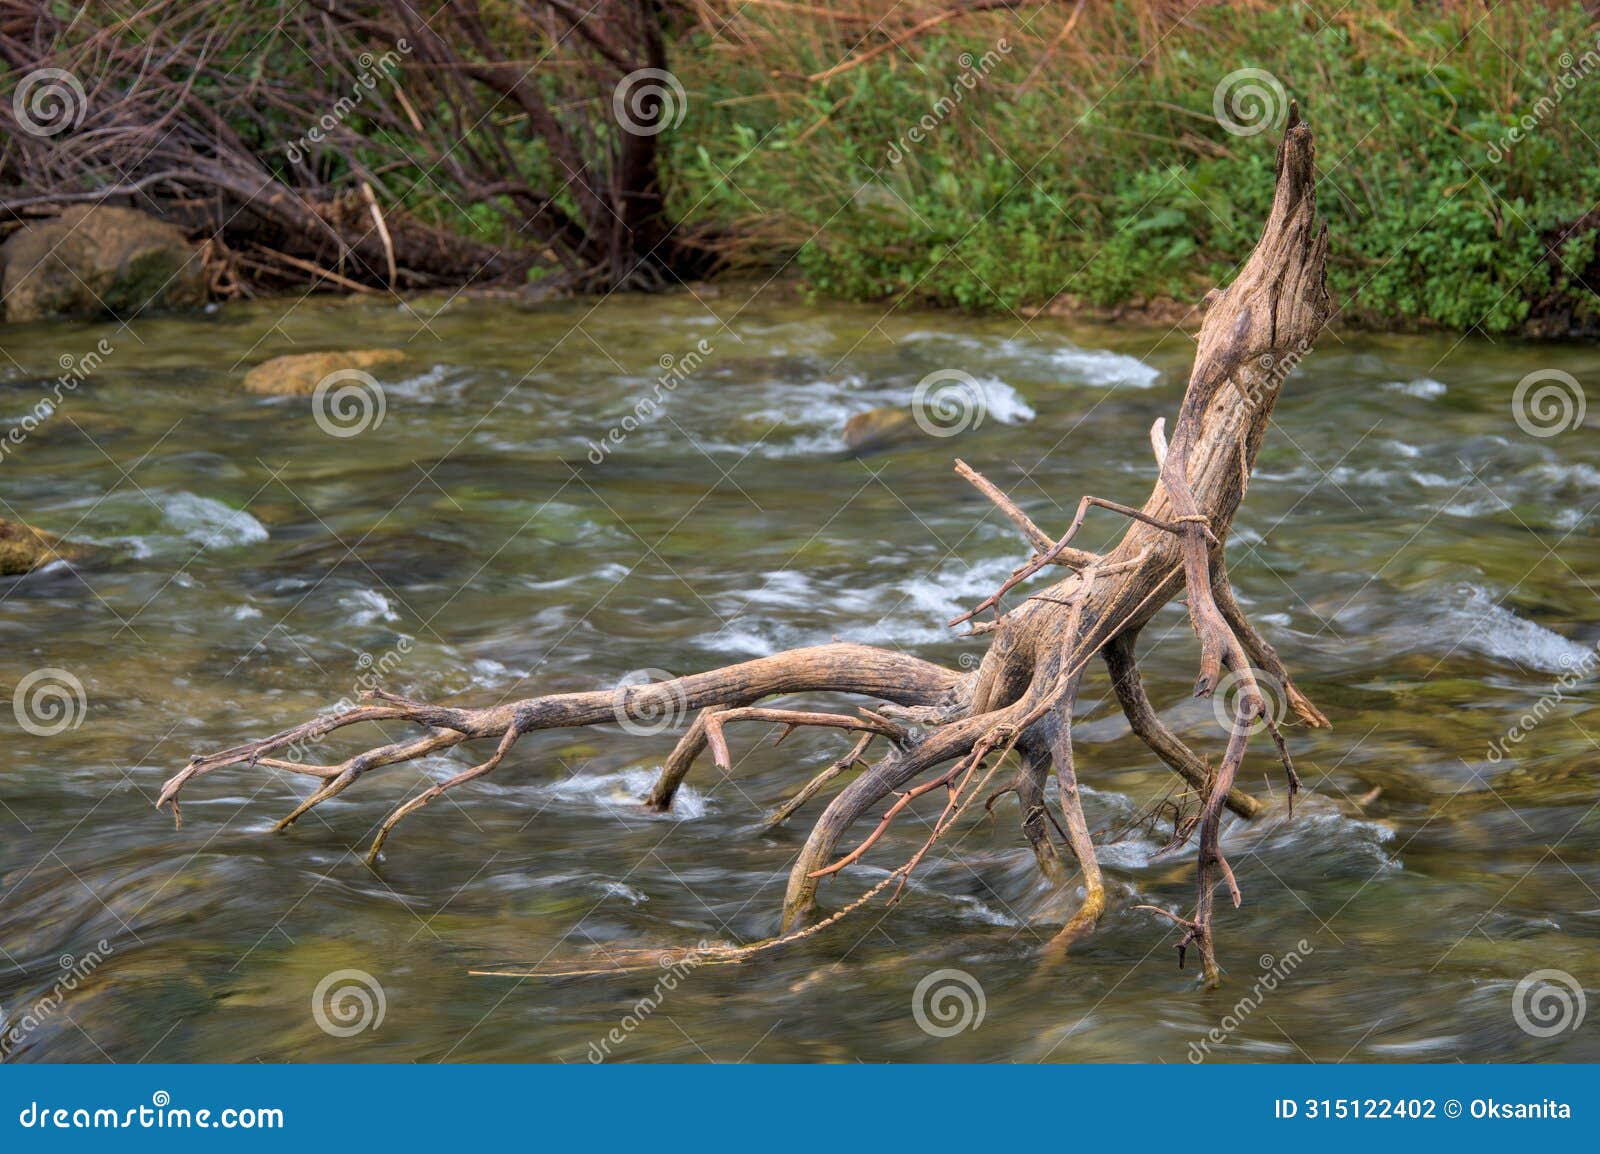 this photo captures the serenity of a branch resting in river water.